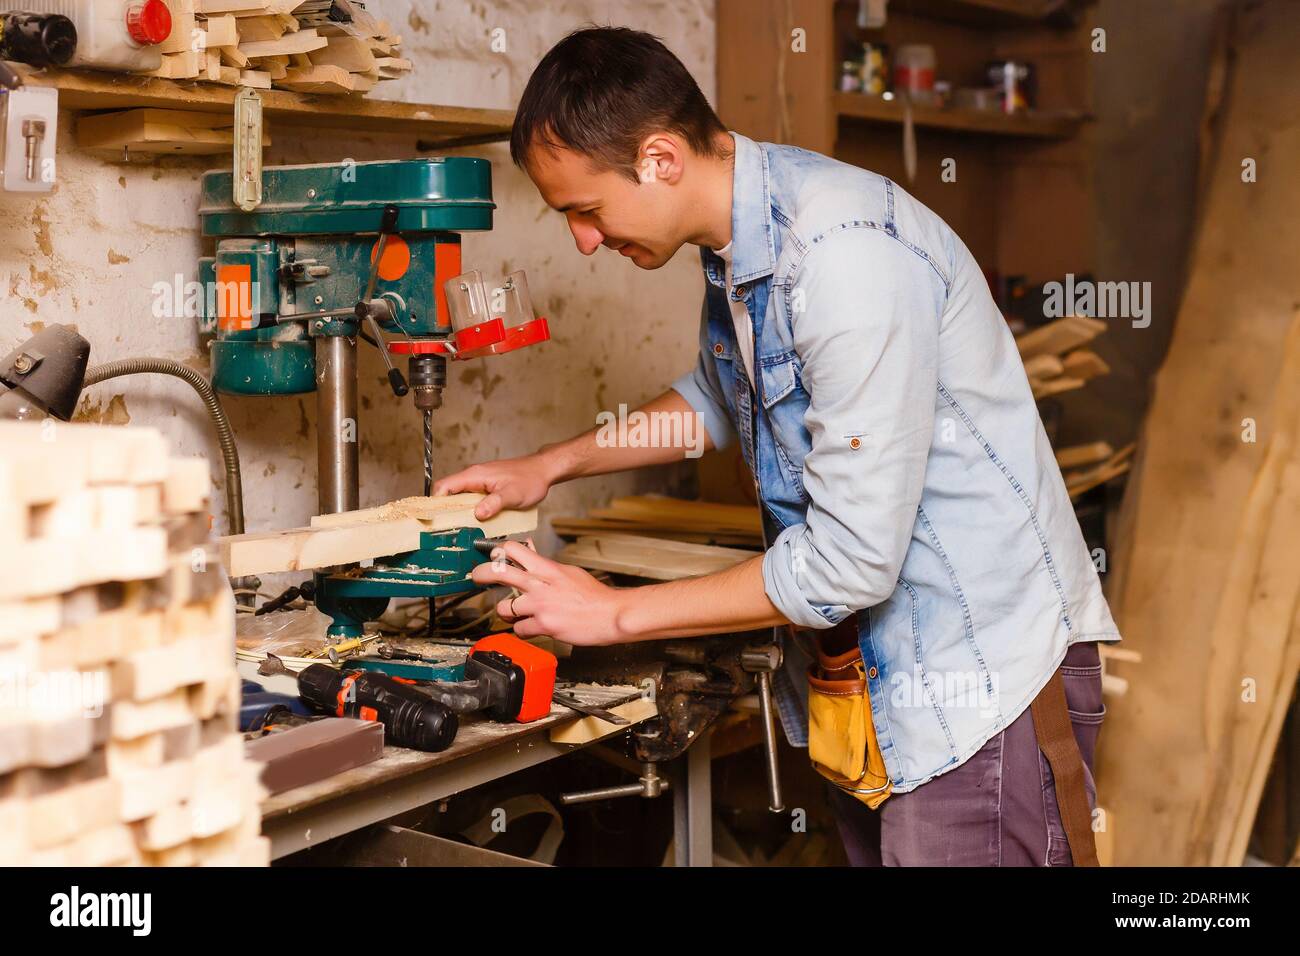 Carpenter works in a workshop for the production of vintage furniture Stock Photo